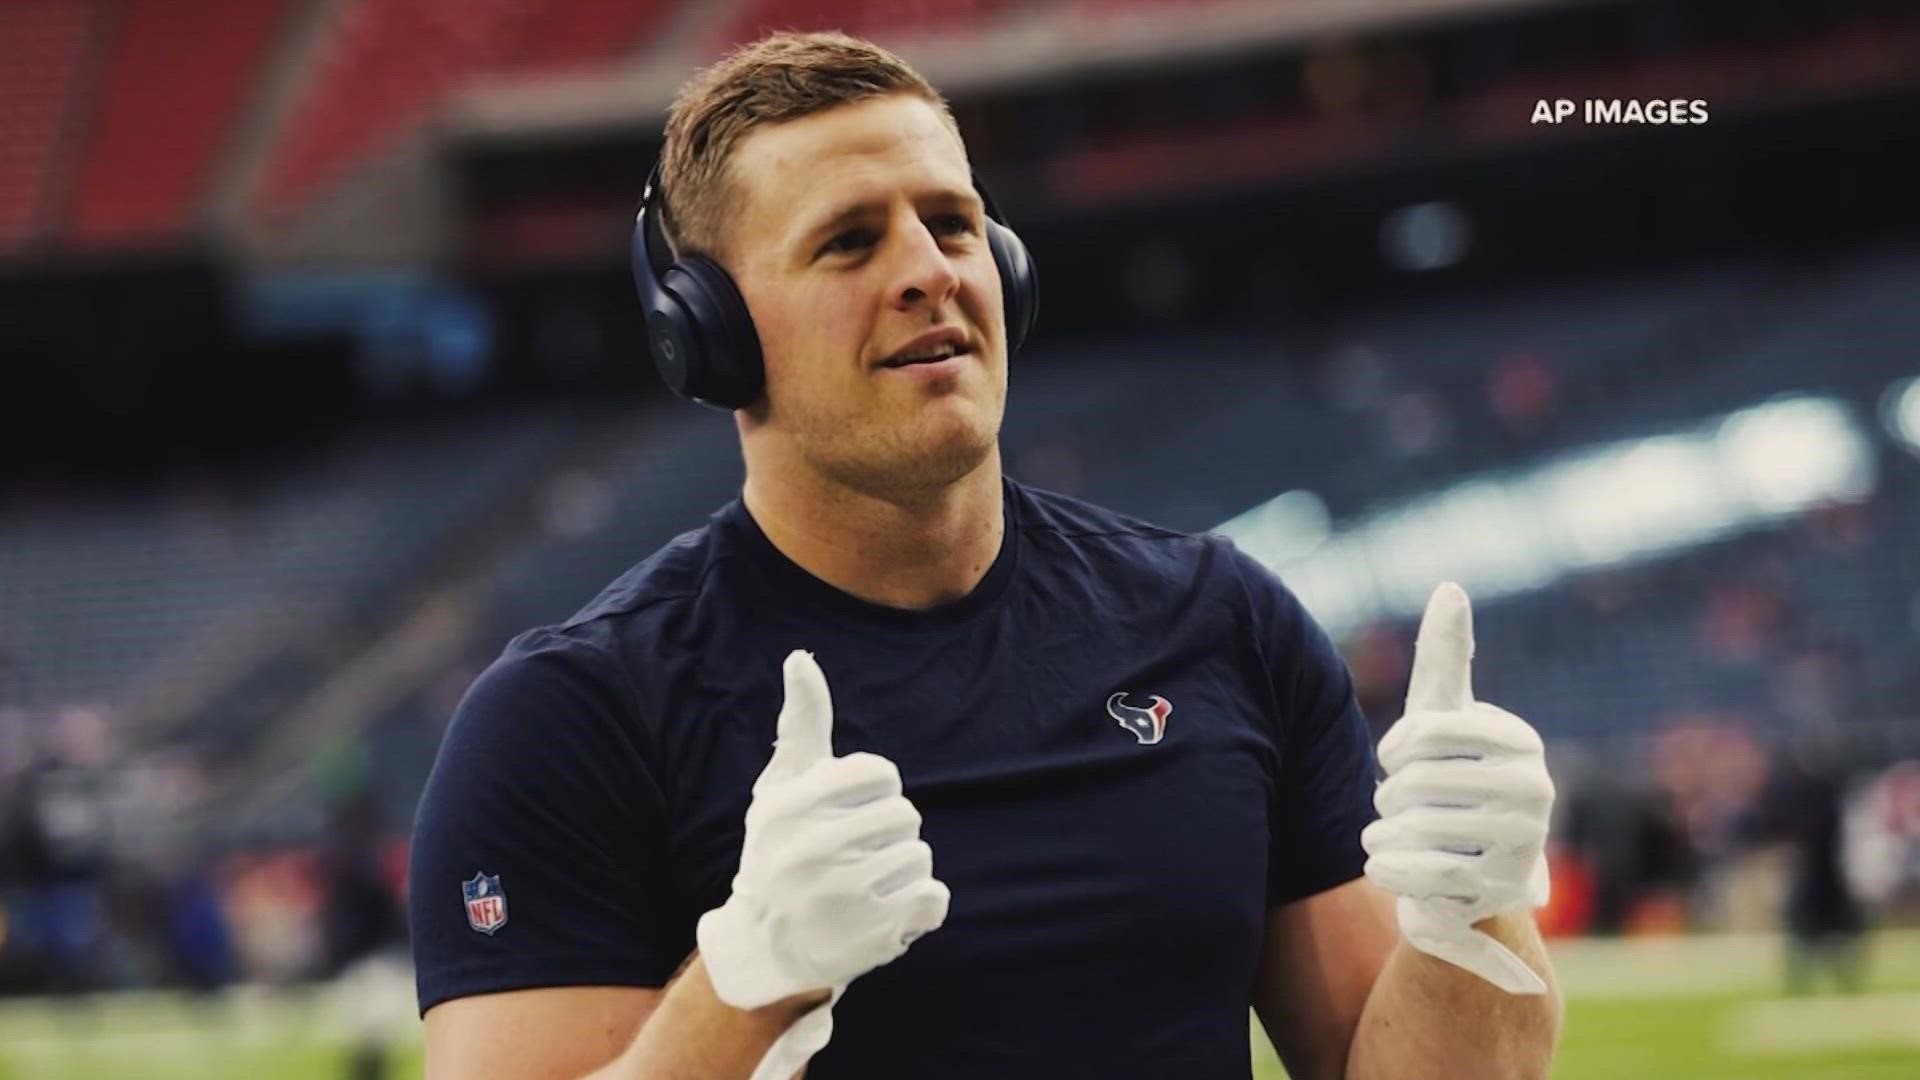 A Houston family had been unable to bury their grandfather for nearly a  month, so they turned to Twitter to sell some things. JJ Watt stepped in to help.